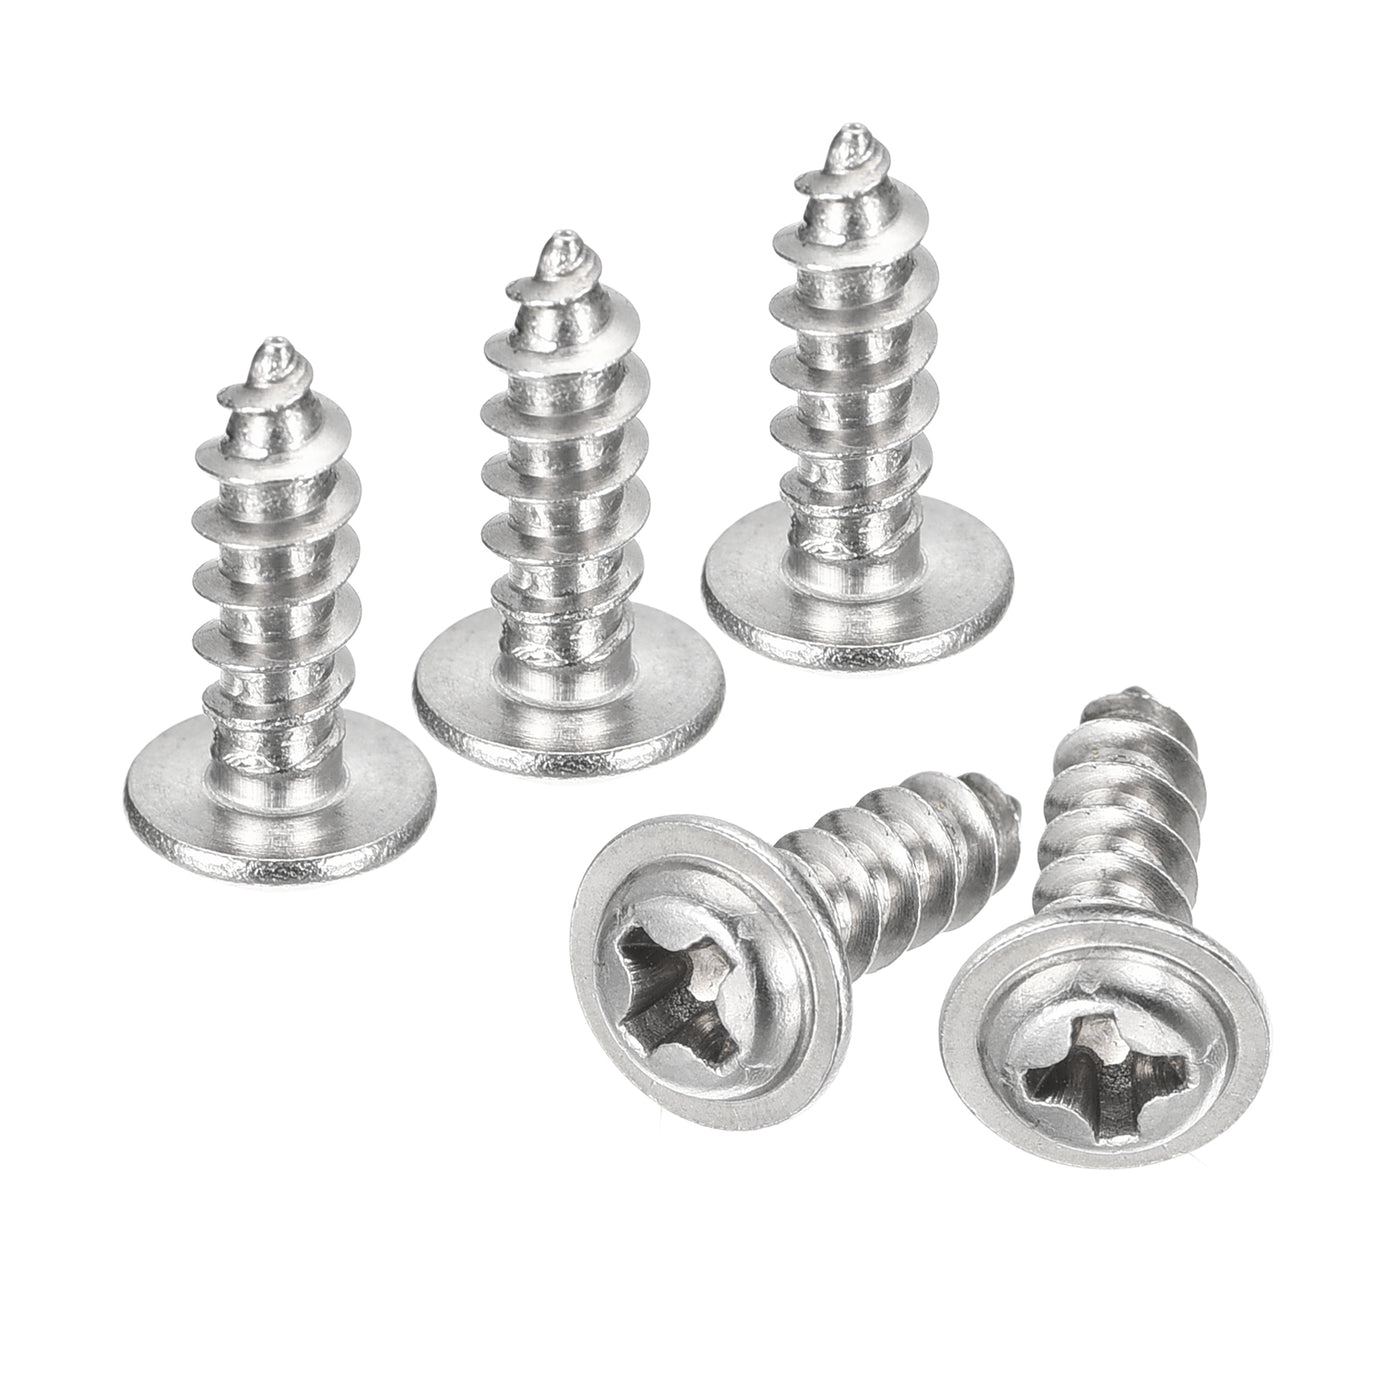 uxcell Uxcell ST4x12mm Phillips Pan Head Self-tapping Screw with Washer, 50pcs - 304 Stainless Steel Wood Screw Full Thread (Silver)